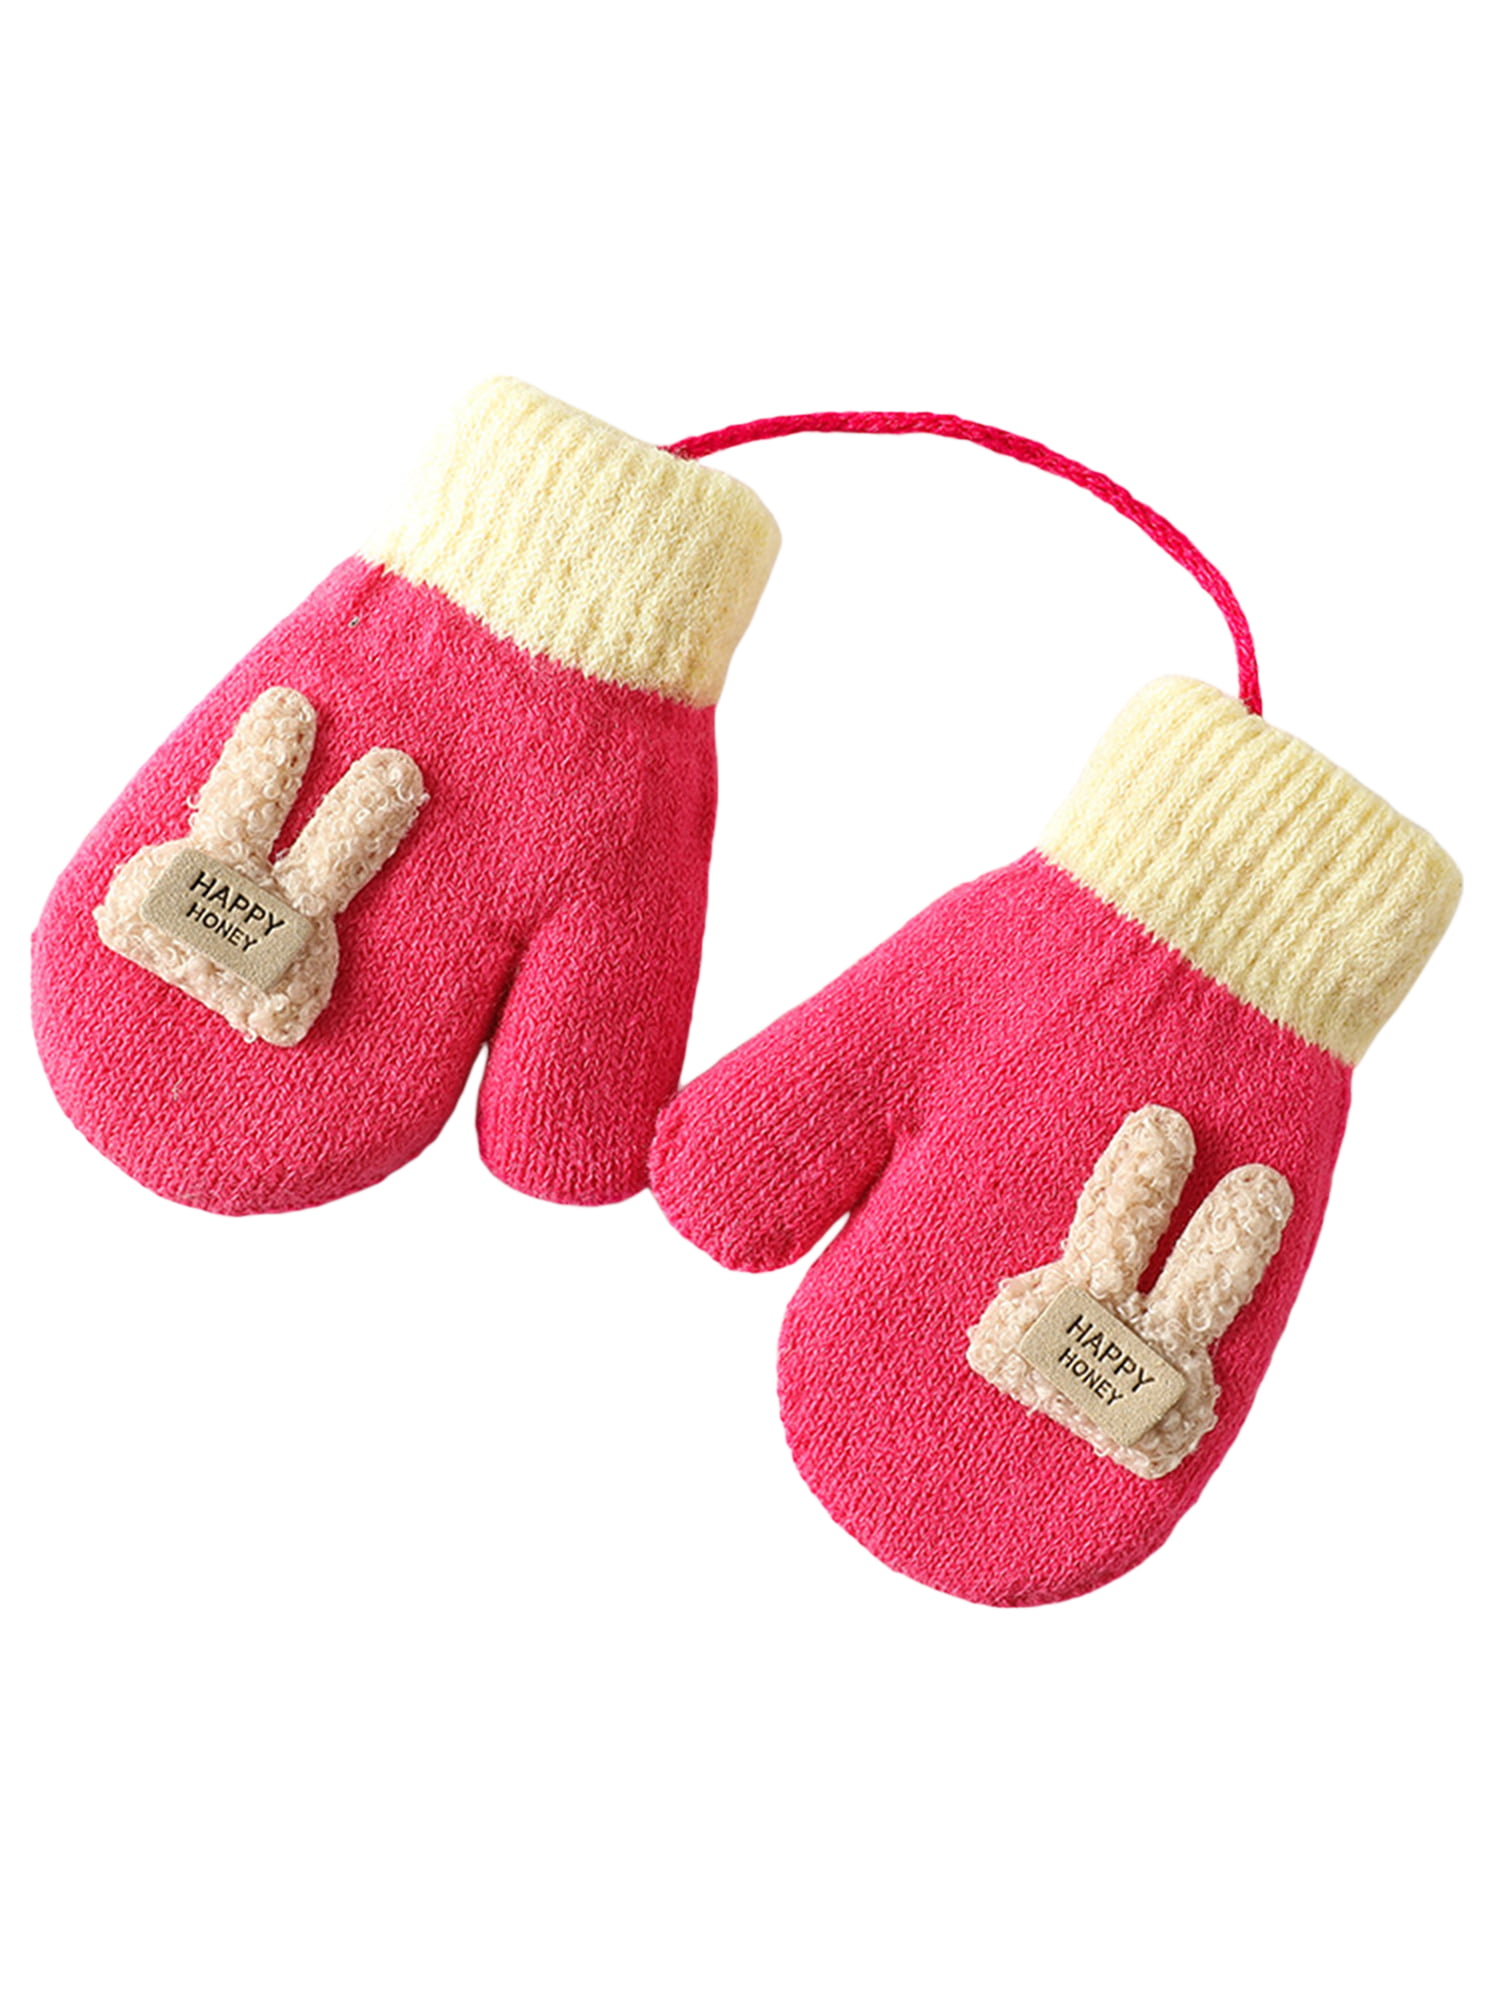 1 Pair Toddler Baby Winter Warm Gloves Thick Fur Mittens With String Hand Warmer